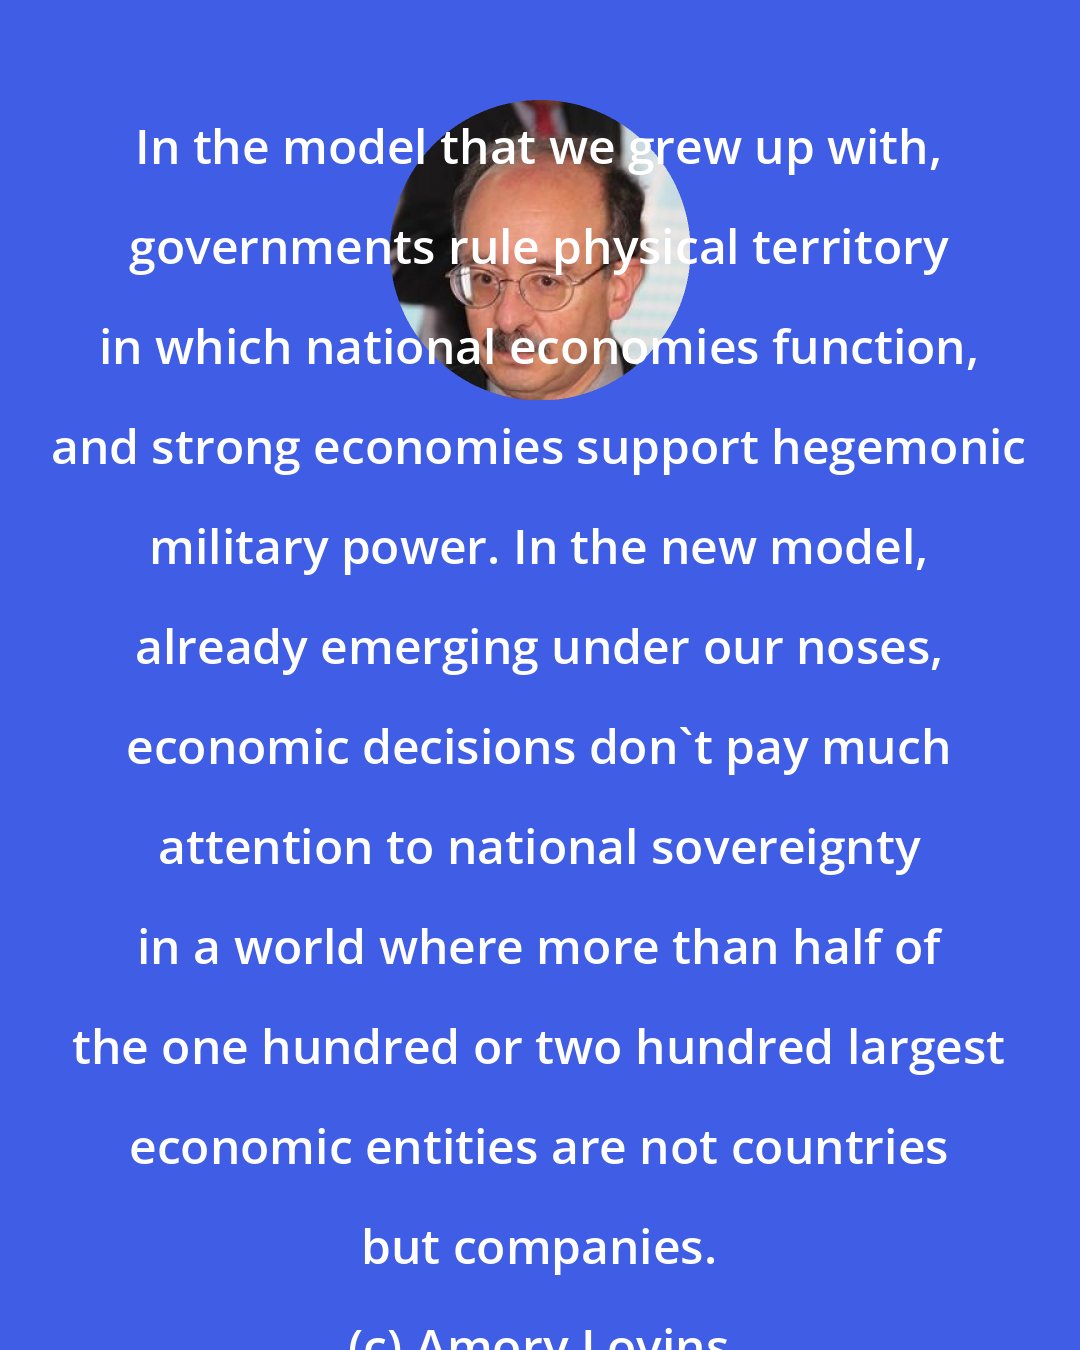 Amory Lovins: In the model that we grew up with, governments rule physical territory in which national economies function, and strong economies support hegemonic military power. In the new model, already emerging under our noses, economic decisions don't pay much attention to national sovereignty in a world where more than half of the one hundred or two hundred largest economic entities are not countries but companies.